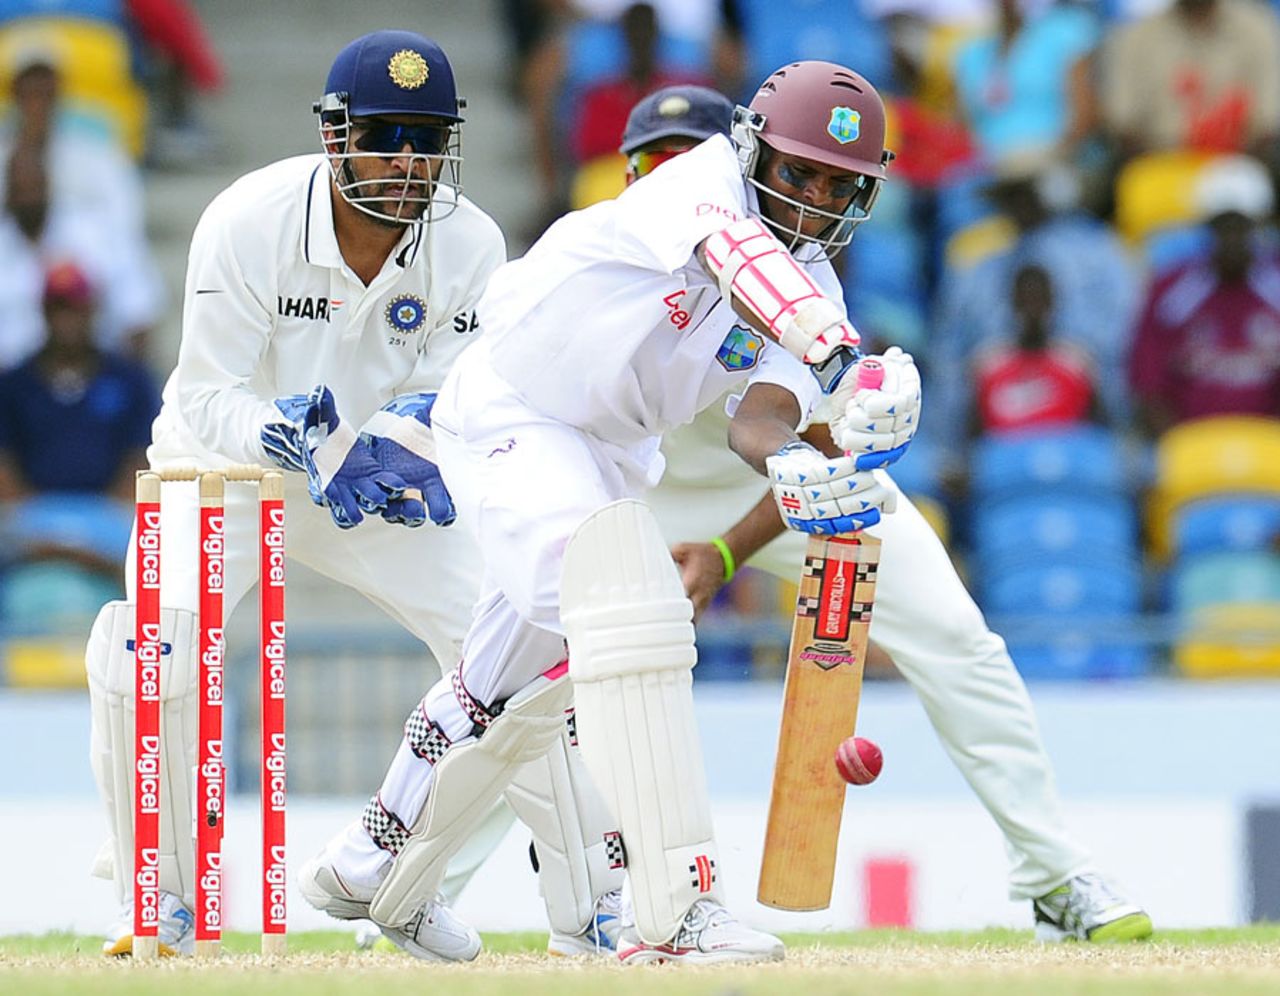 Shivnarine Chanderpaul was his usual obdurate self, West Indies v India, 2nd Test, Bridgetown, 5th day, July 2, 2011 